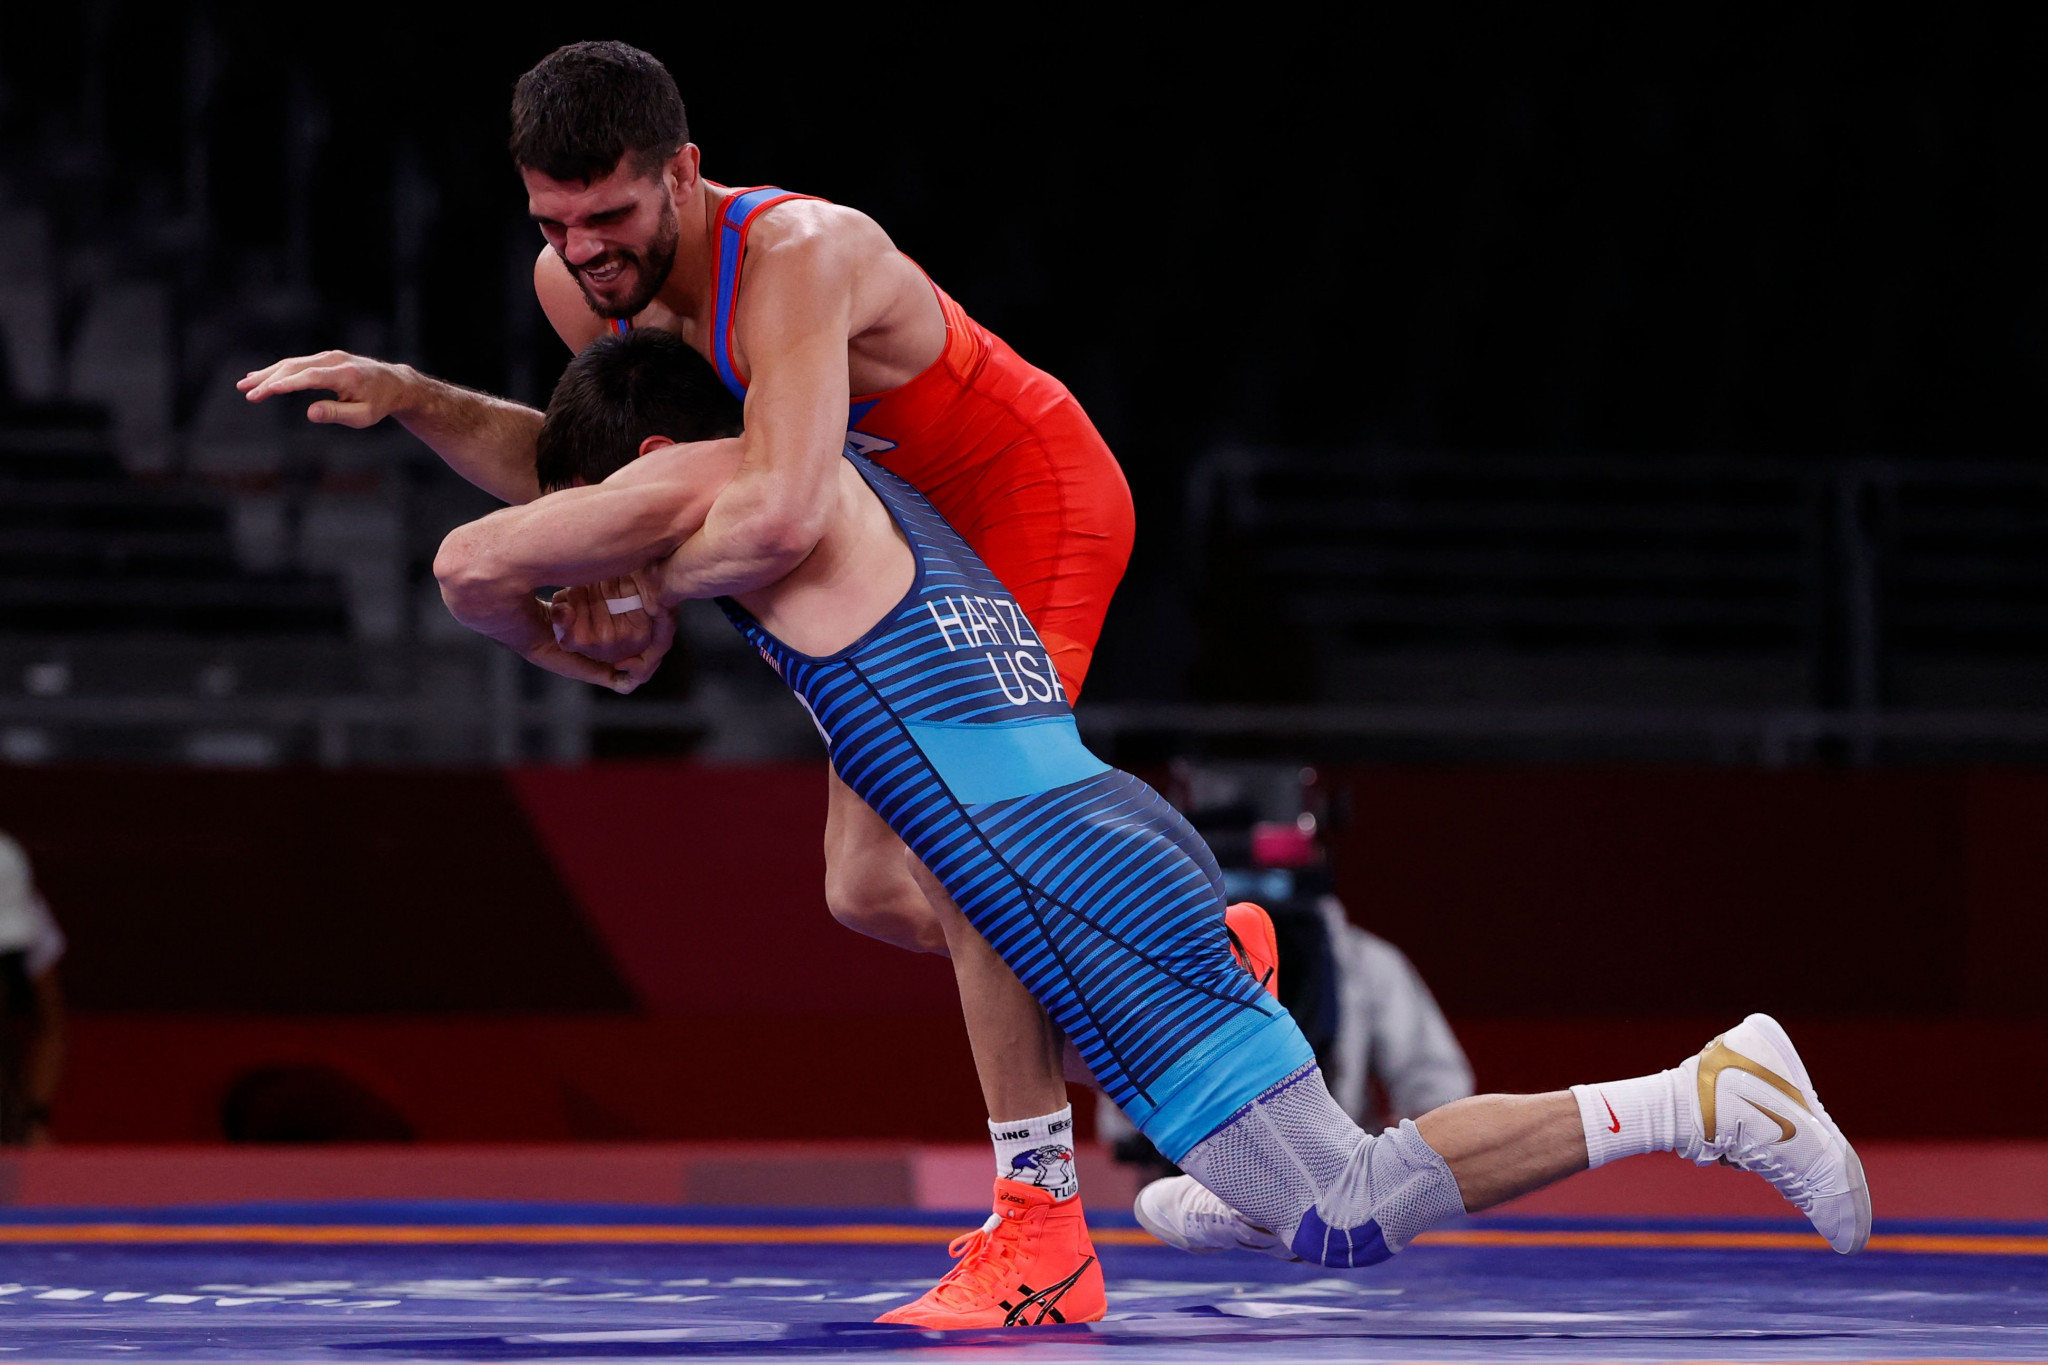 Orta Sanchez tipped for top at World Wrestling Championships in Belgrade